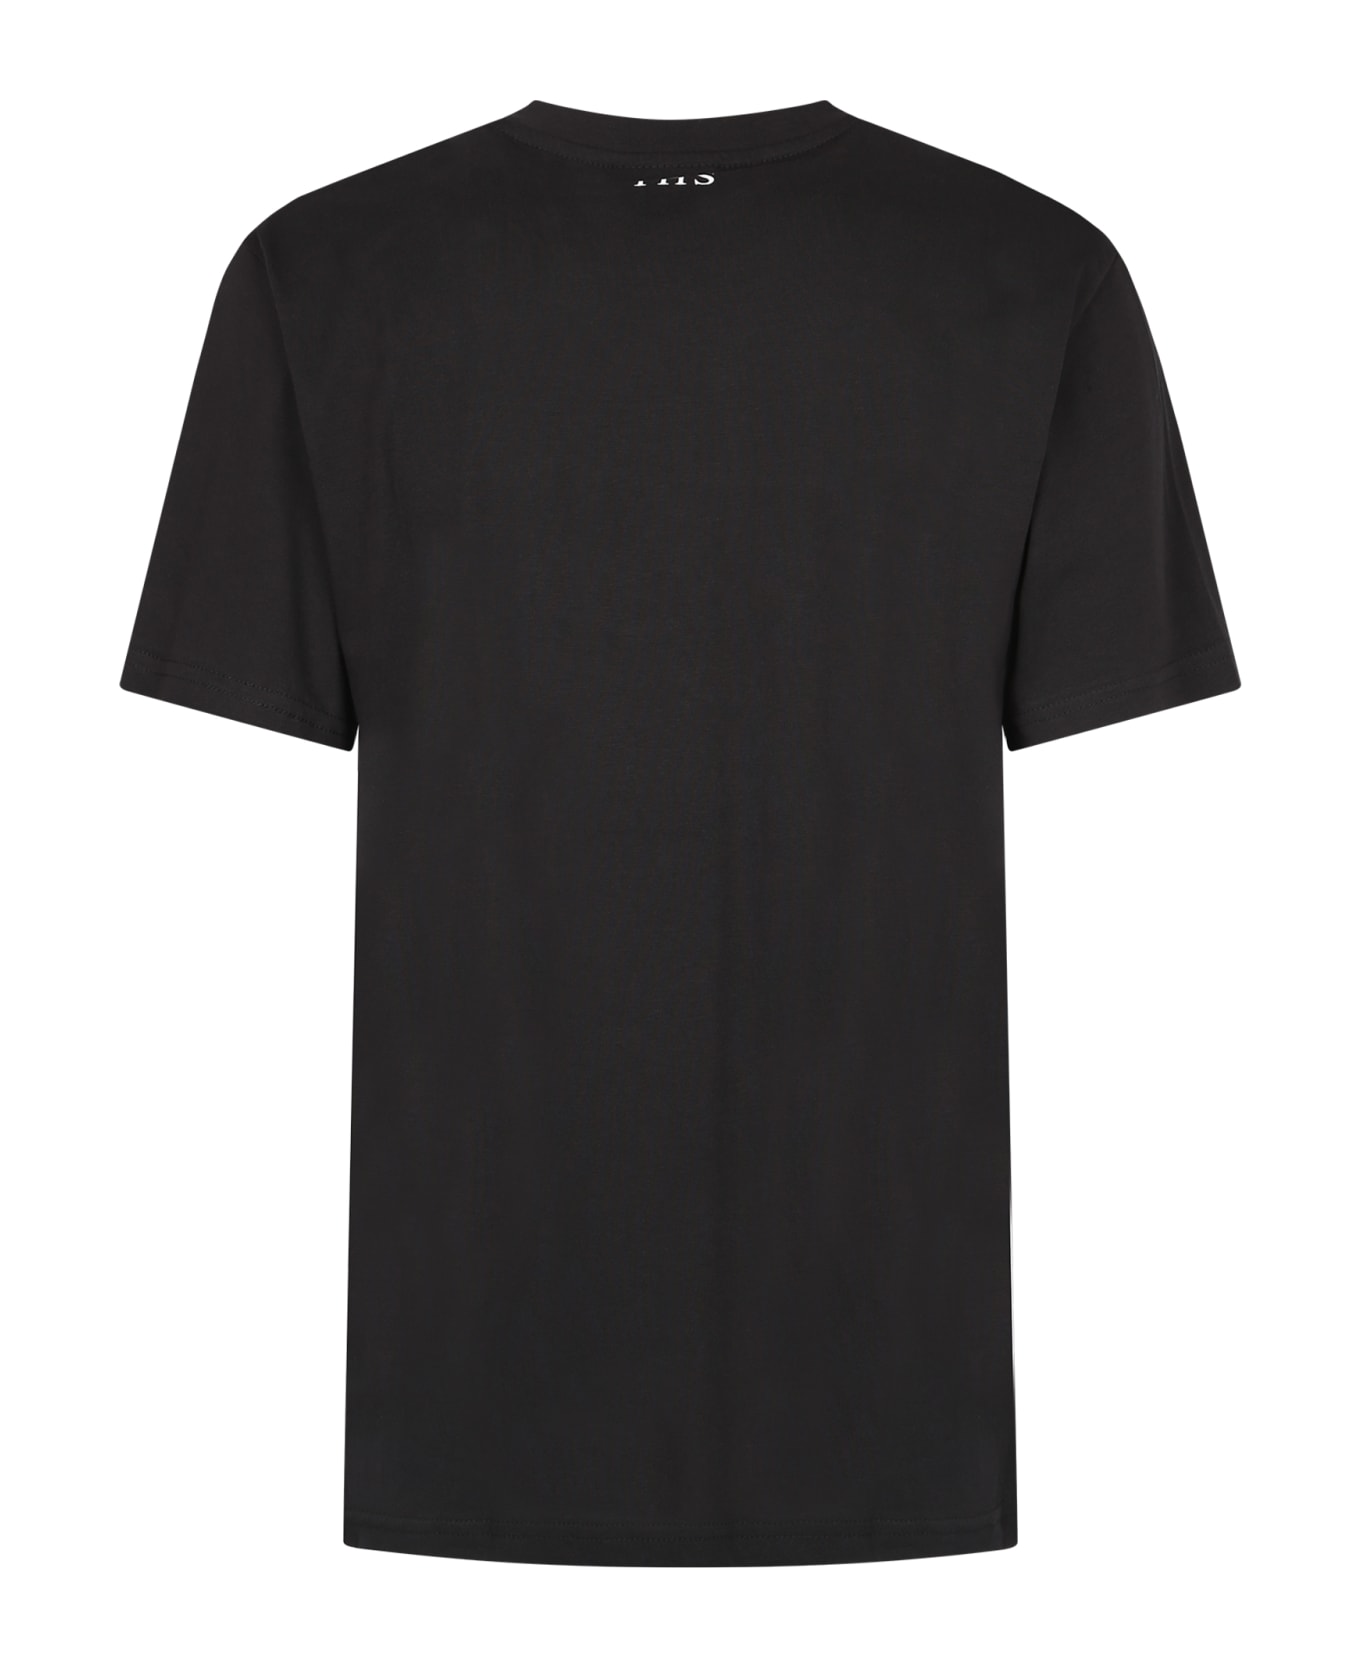 Ihs Relaxed Fit T-shirt - Black シャツ